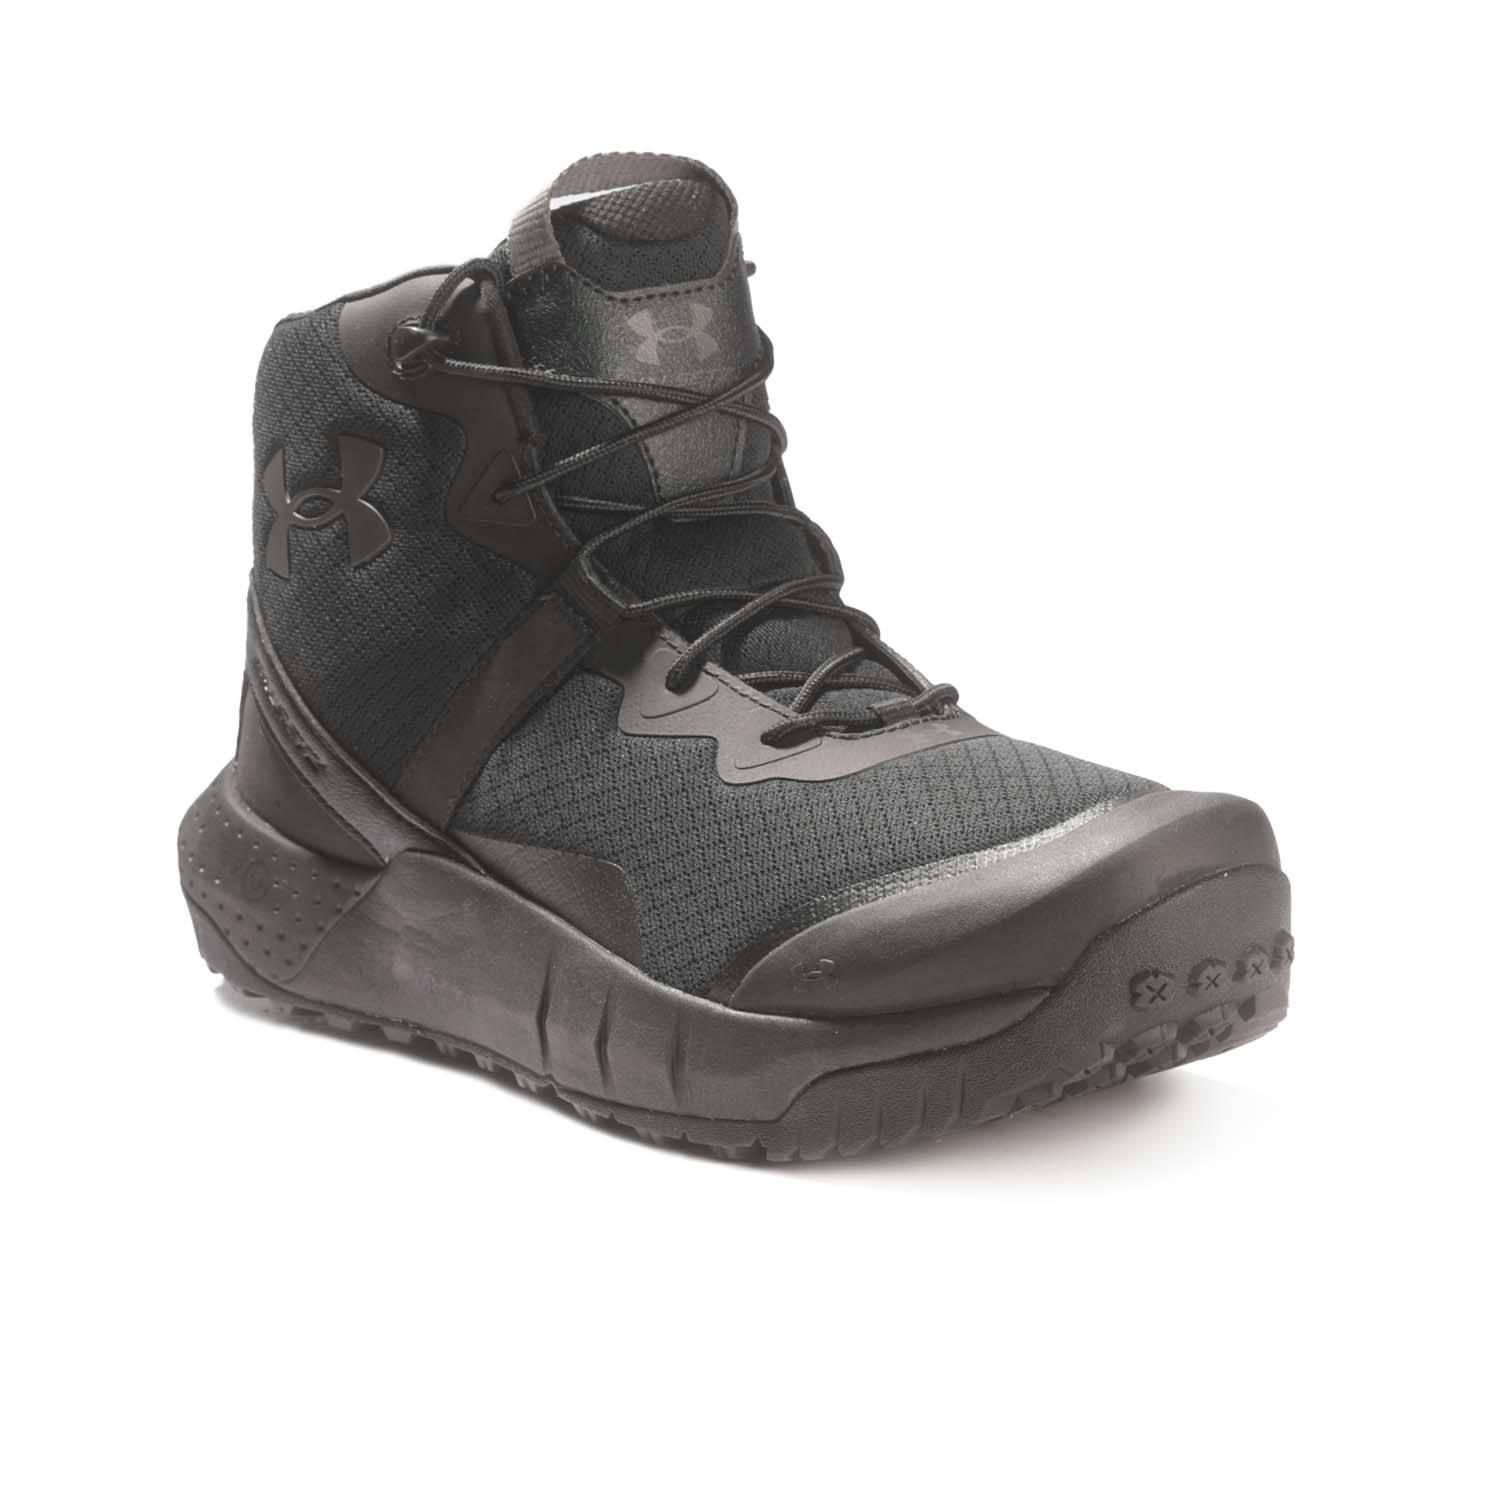 Under Armour Womens Micro G Valsetz AR670 Tactical Boot Coyote